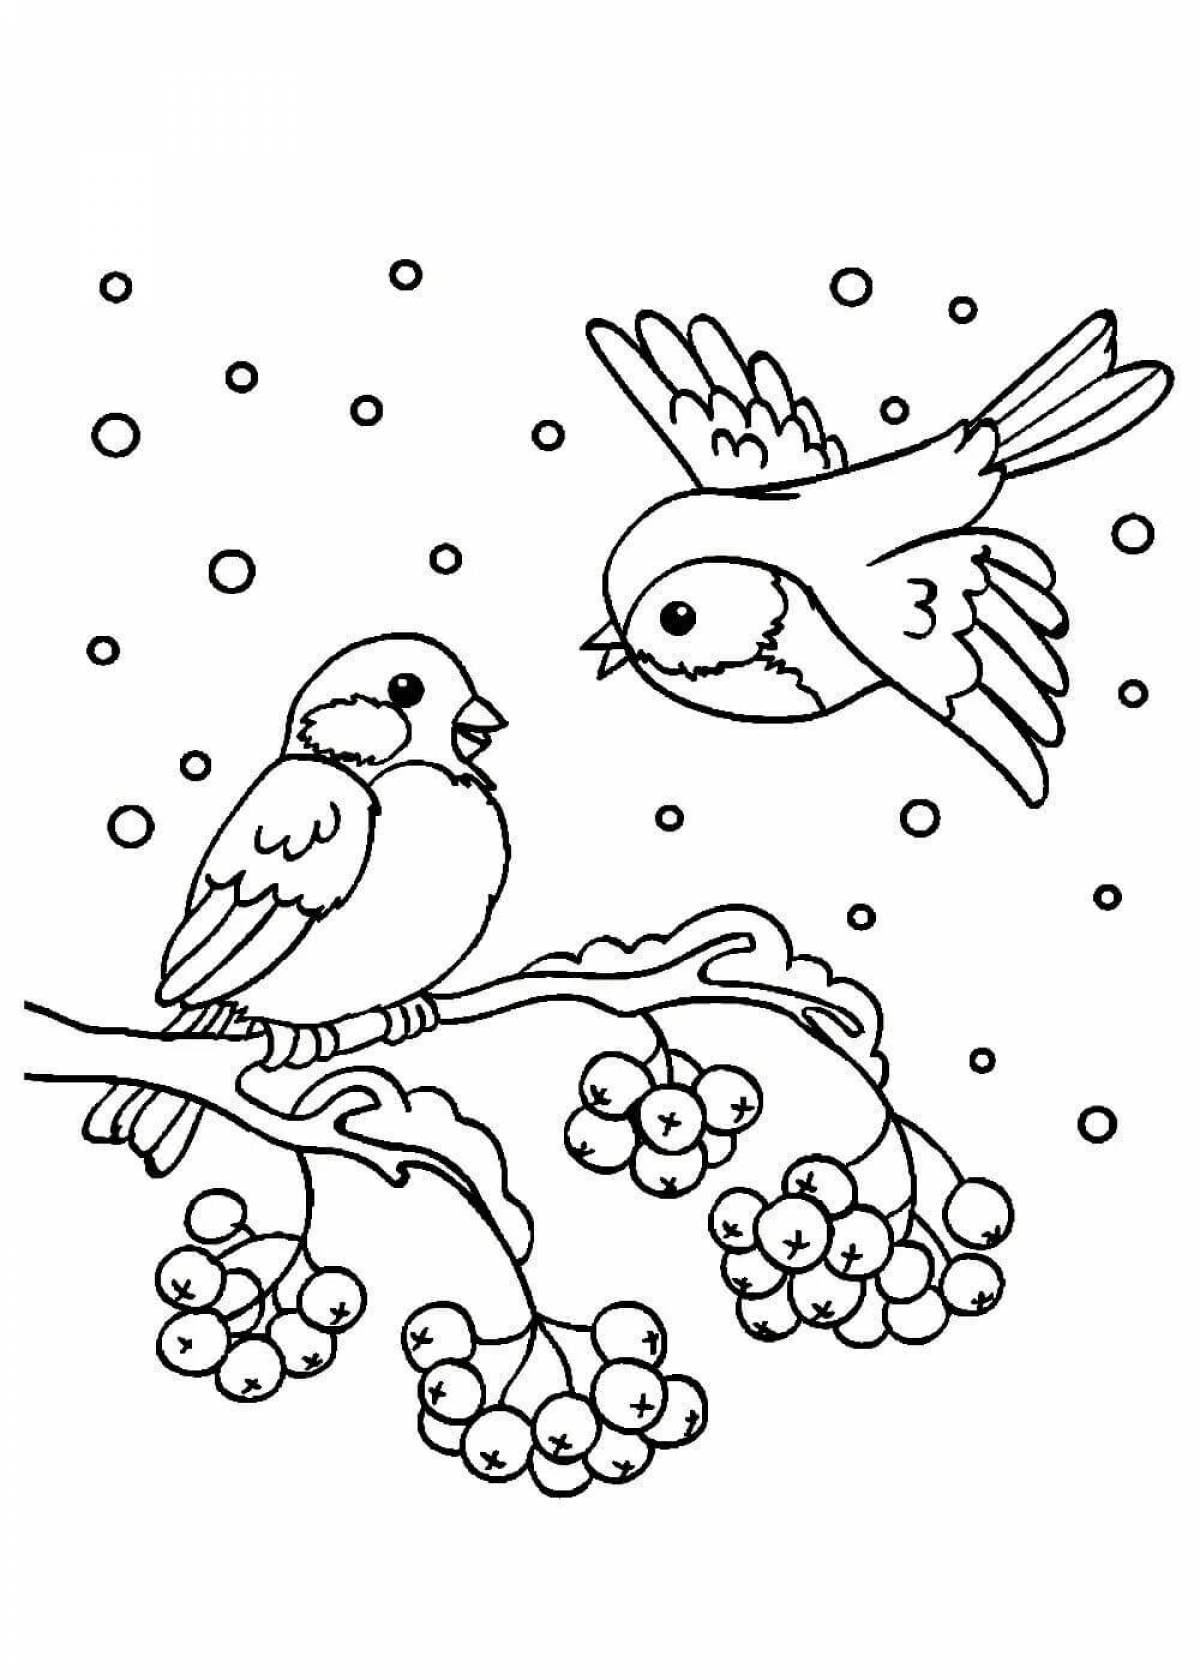 Live winter birds coloring for children 3-4 years old